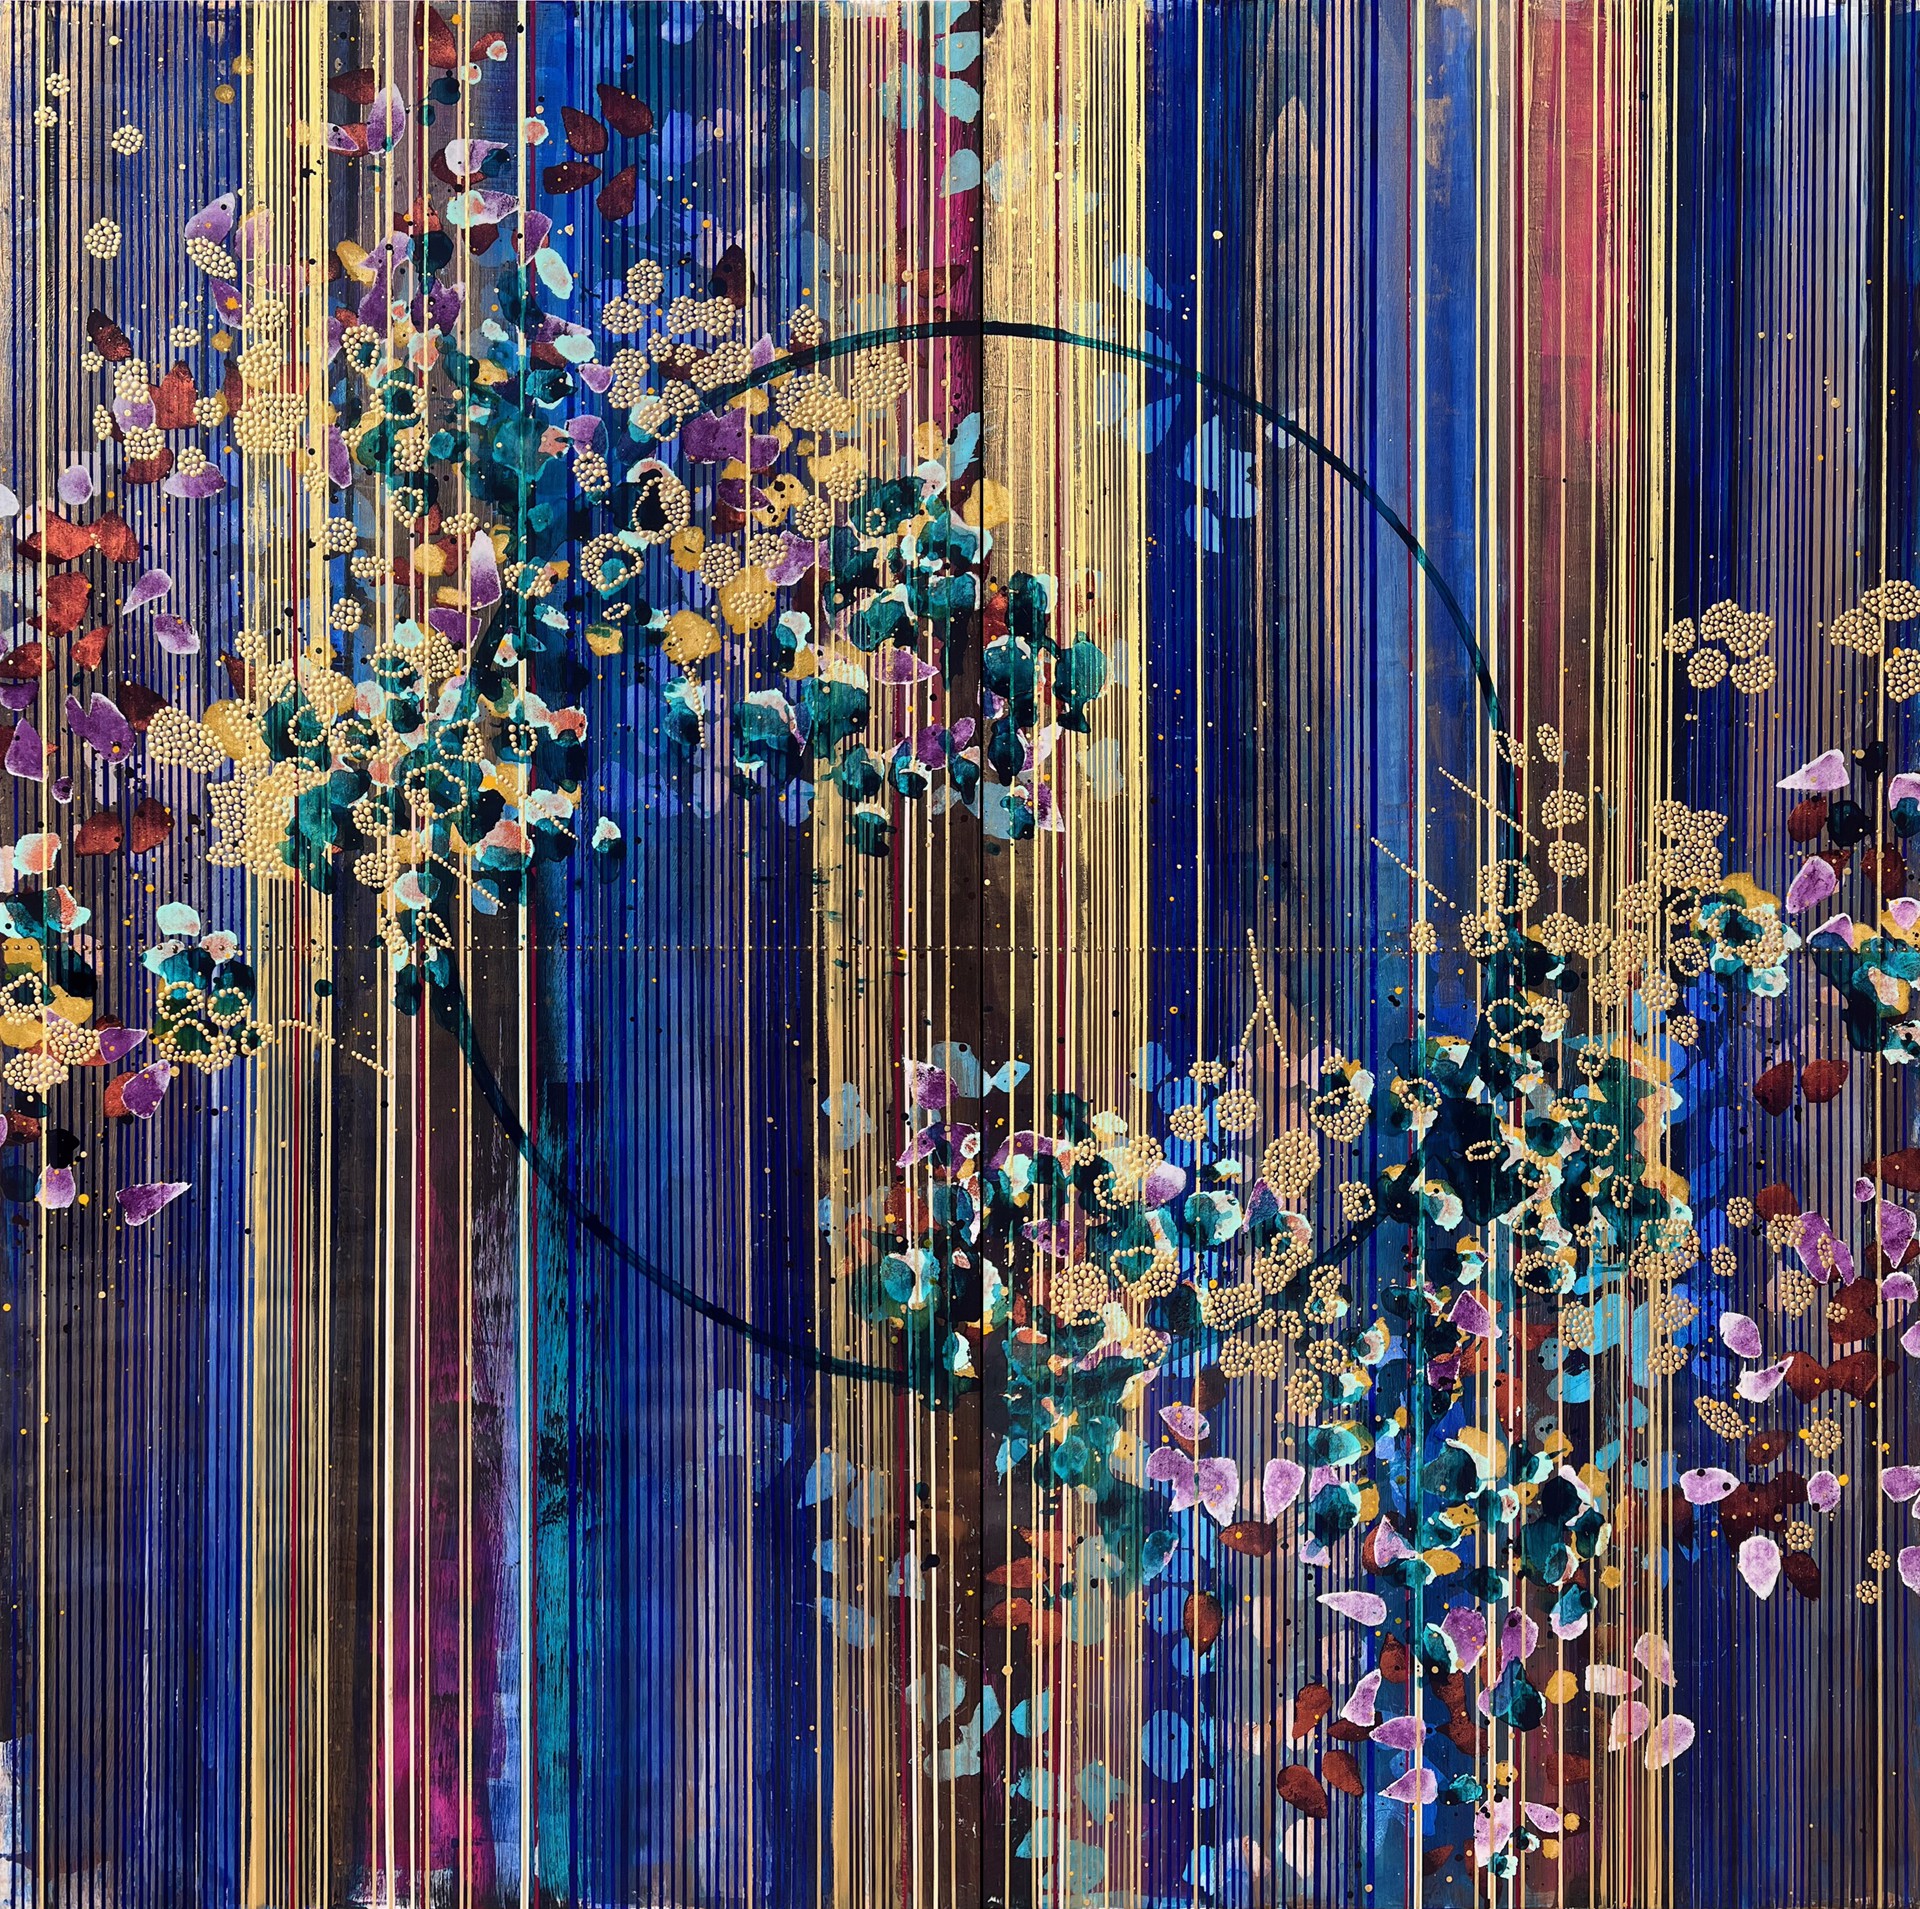 Original Mixed Media Painting In Blues And Purples With Vertical Striping Pattern, Central Circular Orientation, Flower Petal Motifs And Gold Details